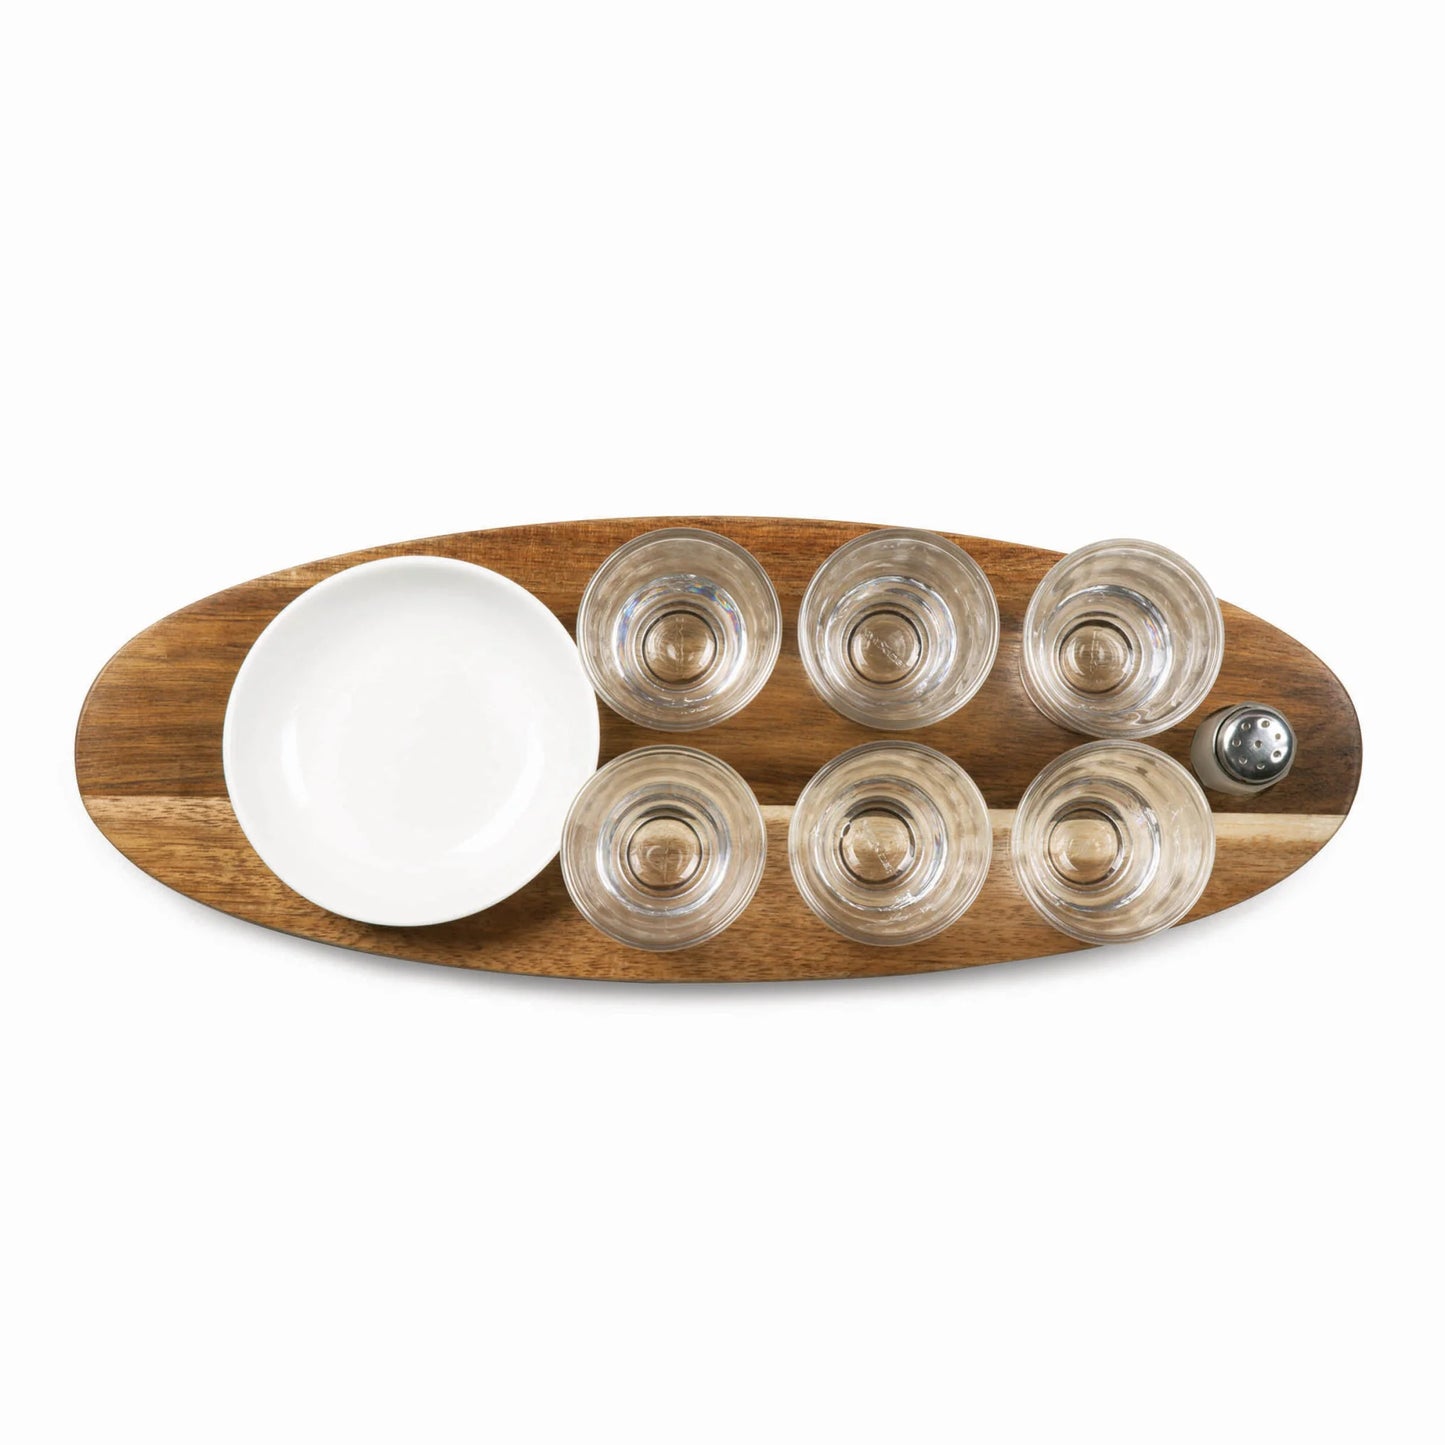 Shot Glass Serving Set with Wooden Tray